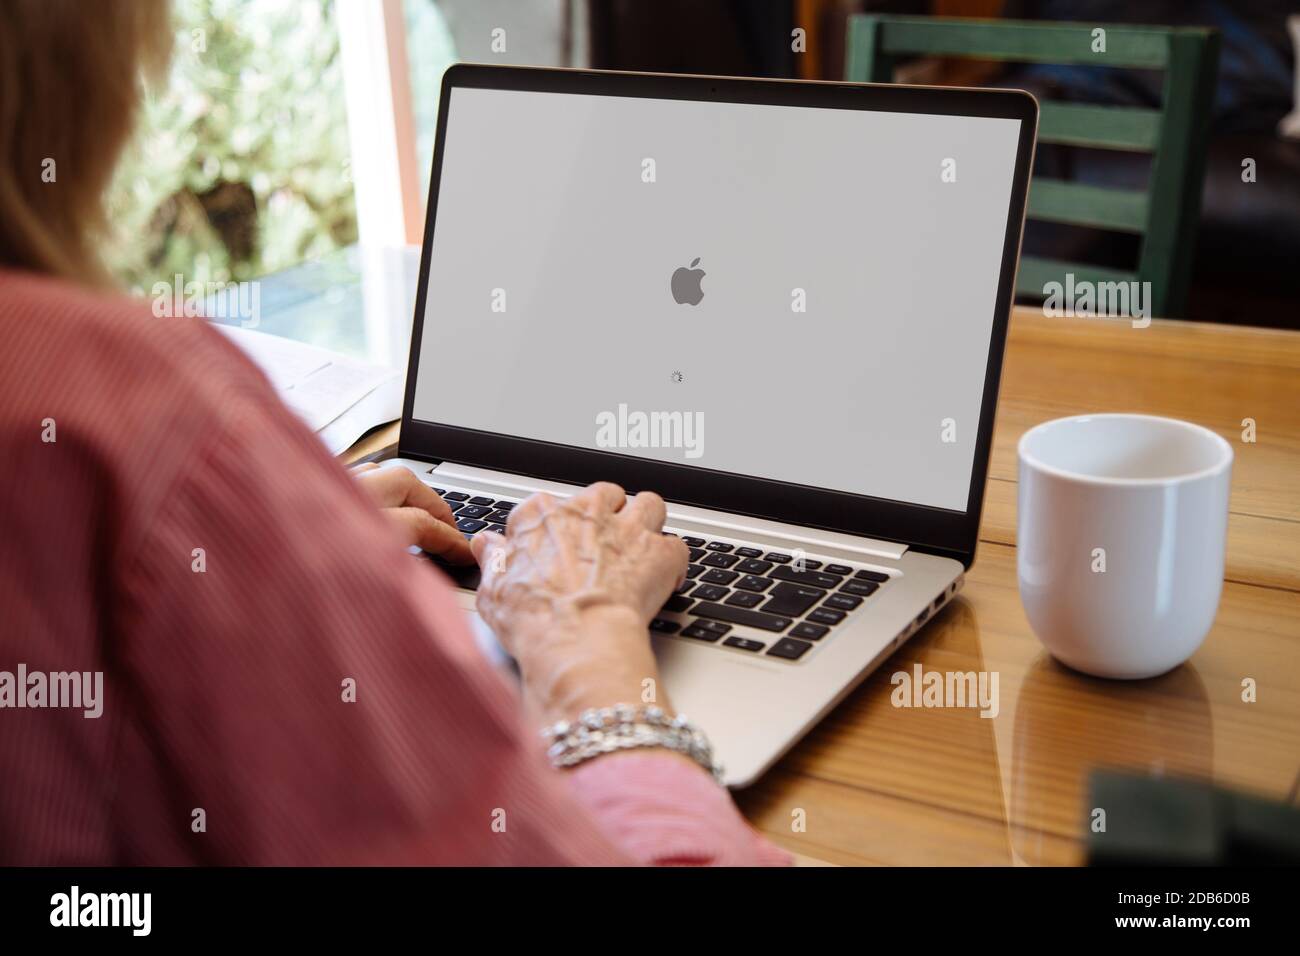 ROSARIO, ARGENTINA - NOVEMBER 16, 2020: Apple logo in the screen of laptop. Mature woman sitting in front of computer with mac os x operating system Stock Photo